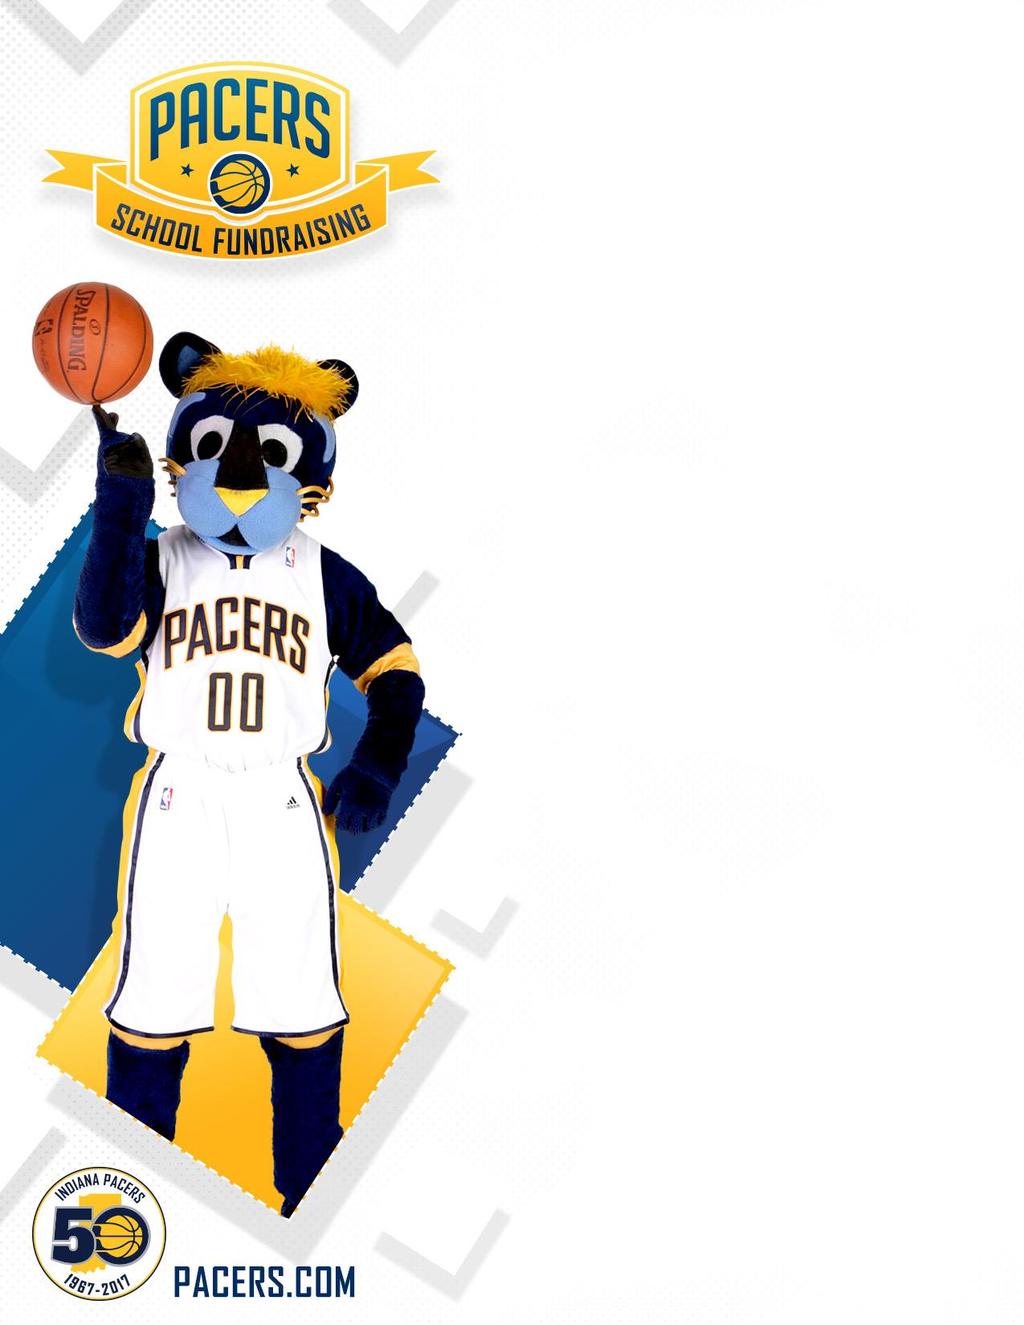 Shamrock Springs Elementary School SAVE THE DATE Tuesday, November 1st, @ 7pm vs. L.A. Lakers In conjunction with a special offer for Shamrock Springs you are invited to come out and see the Indiana Pacers at a discounted price!